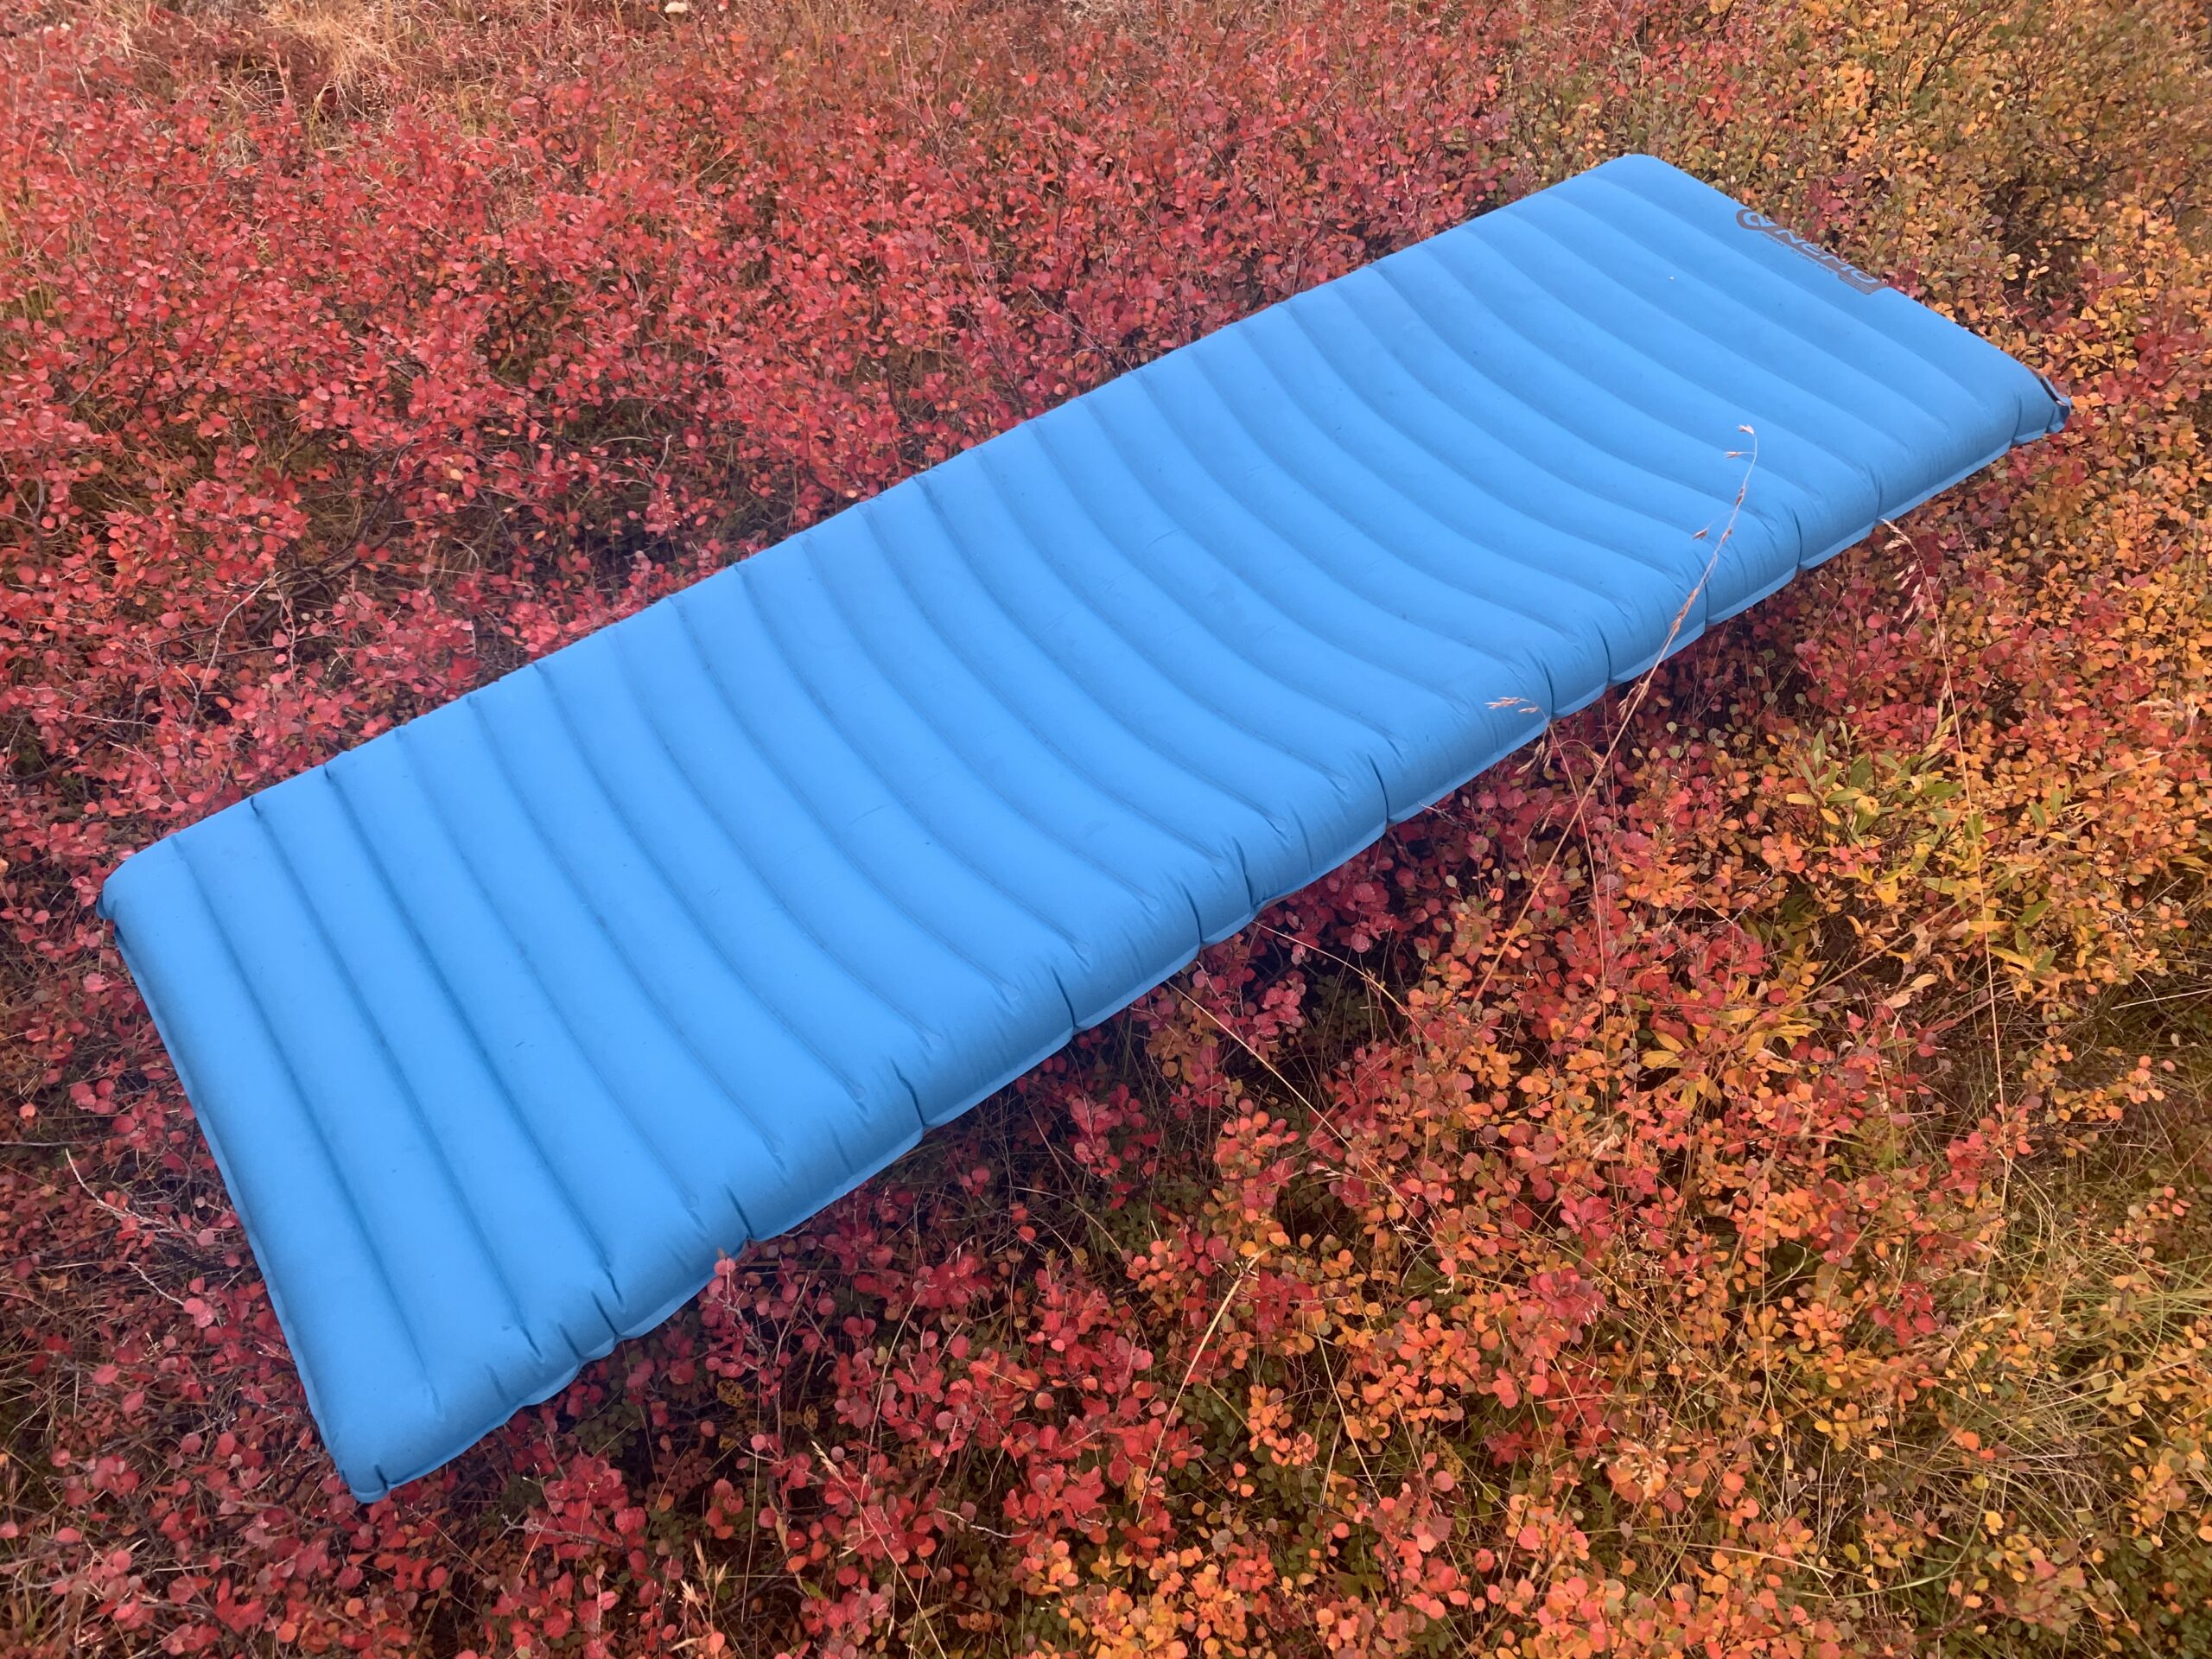 The Nemo Quasar 3D is a lofty and durable sleeping pad